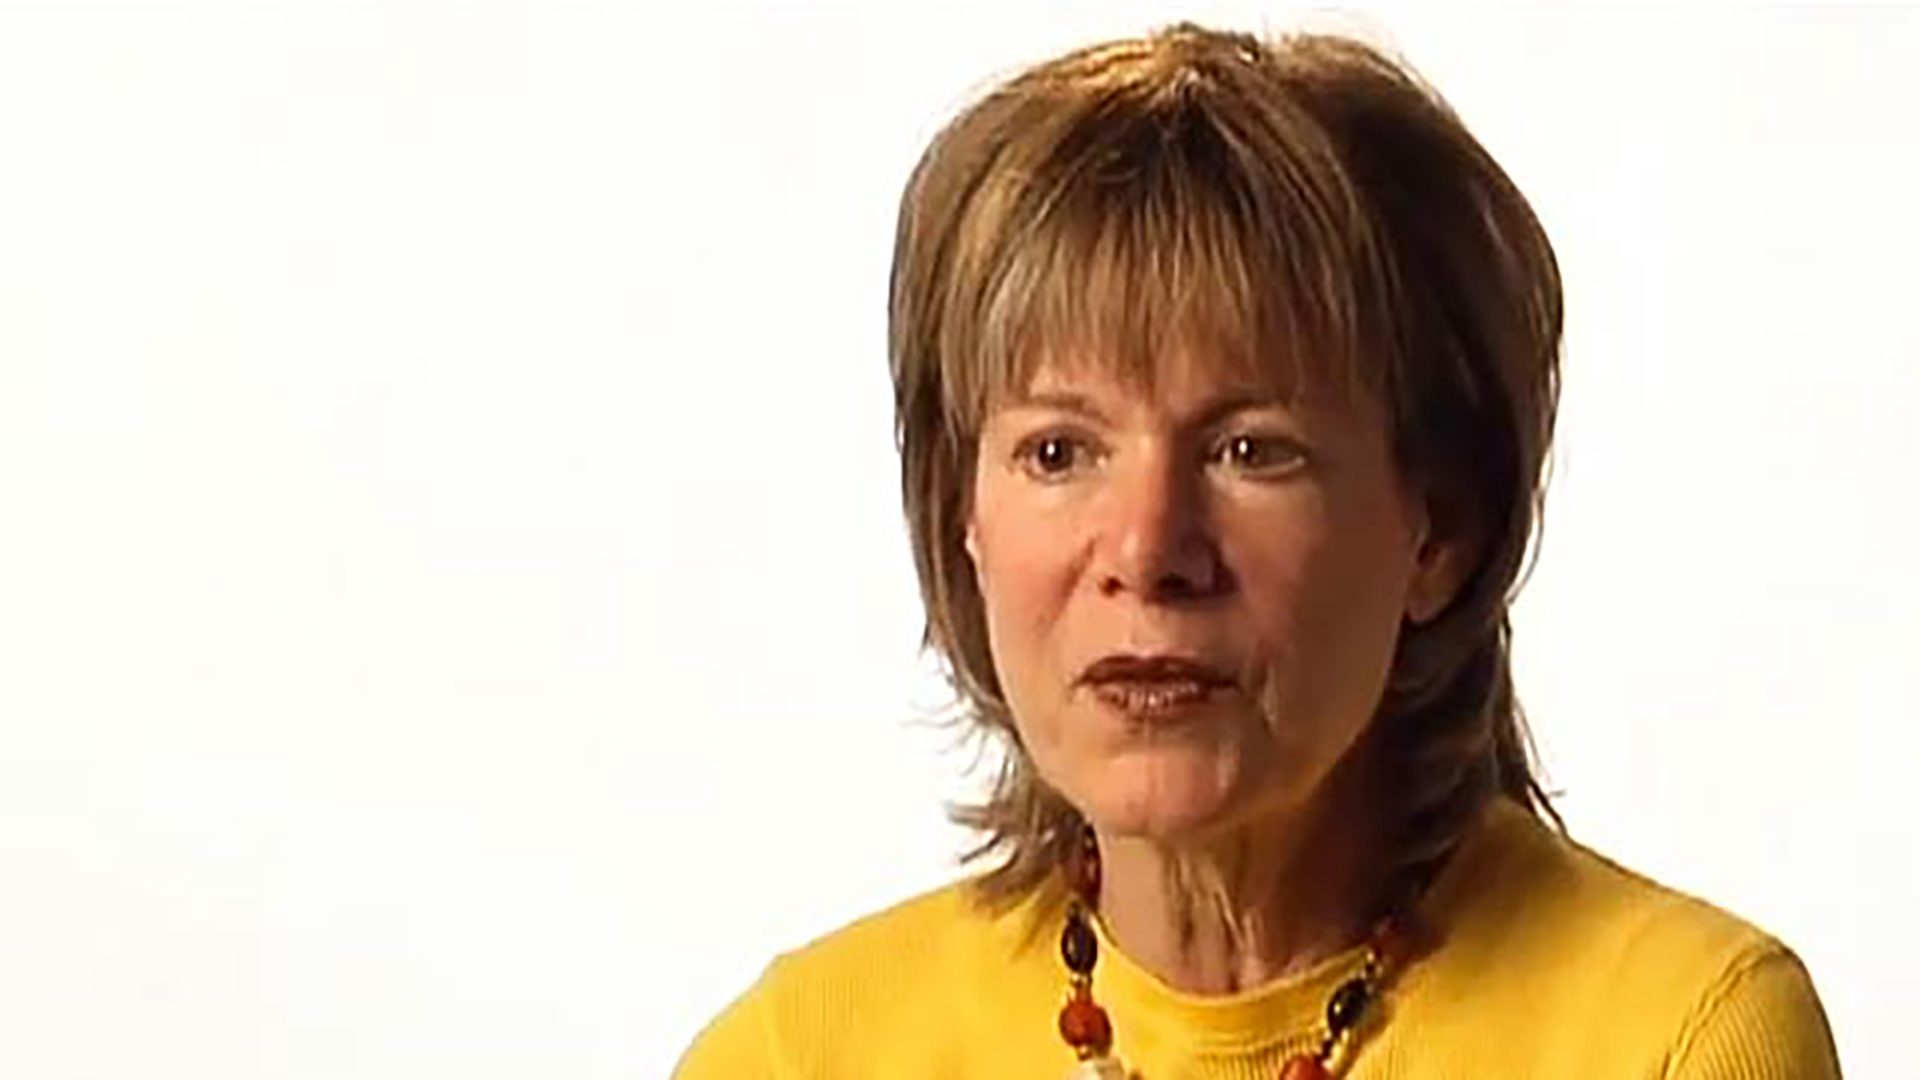 A middle-aged woman wearing a yellow sweater is interviewed against a white background